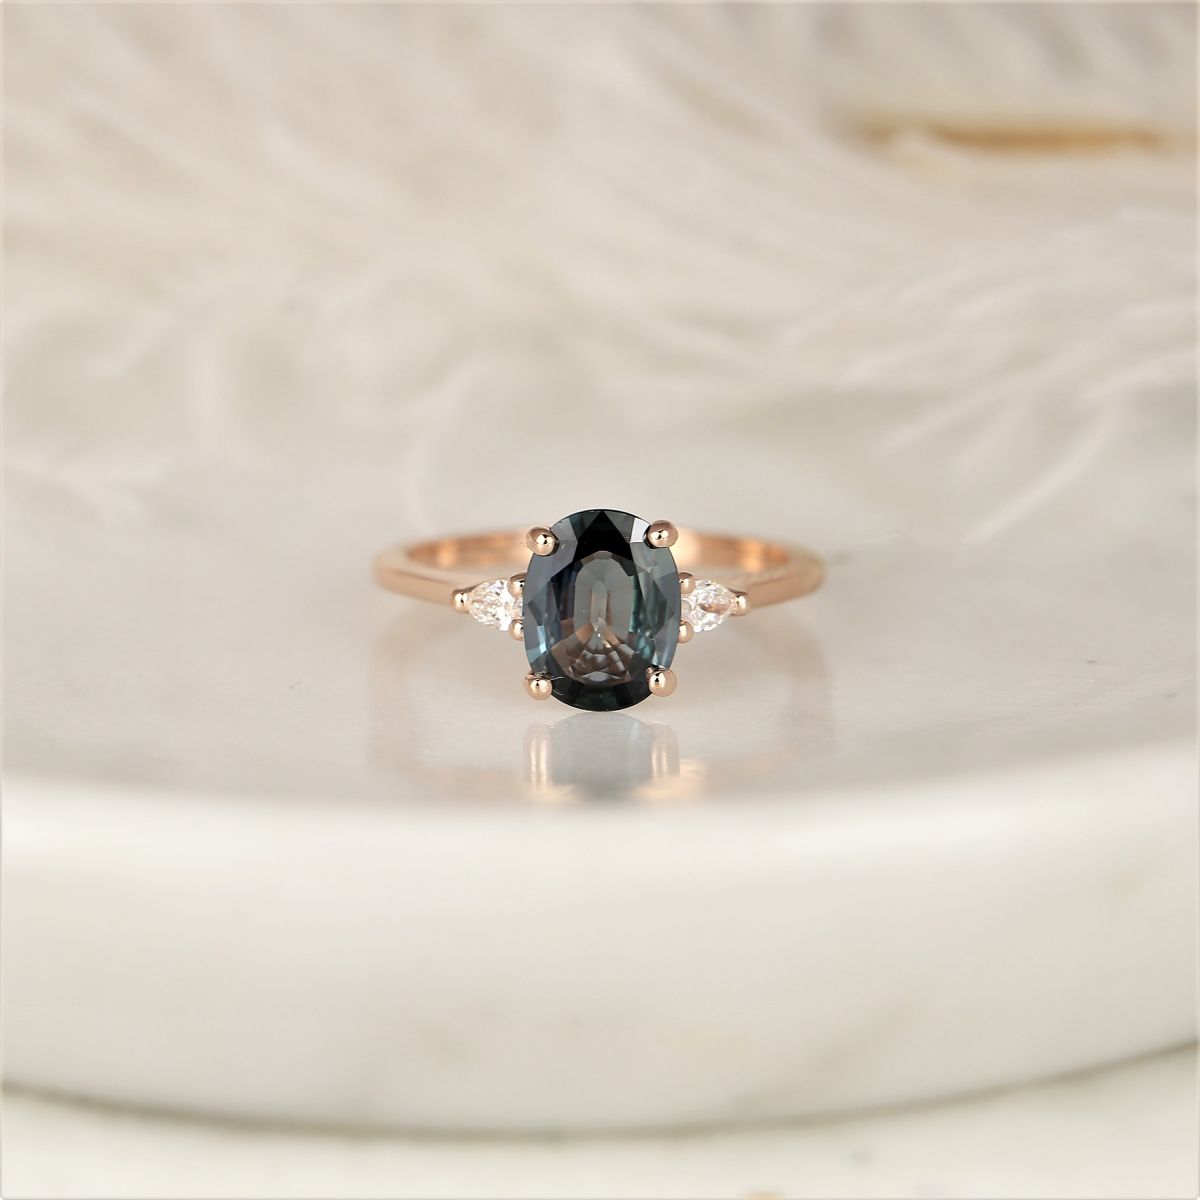 1.58cts Ready to Ship Petite Emery 14kt Rose Gold Ocean Blue Teal Sapphire Diamond Pear 3 Stone Oval Engagement Ring,Rosados Box